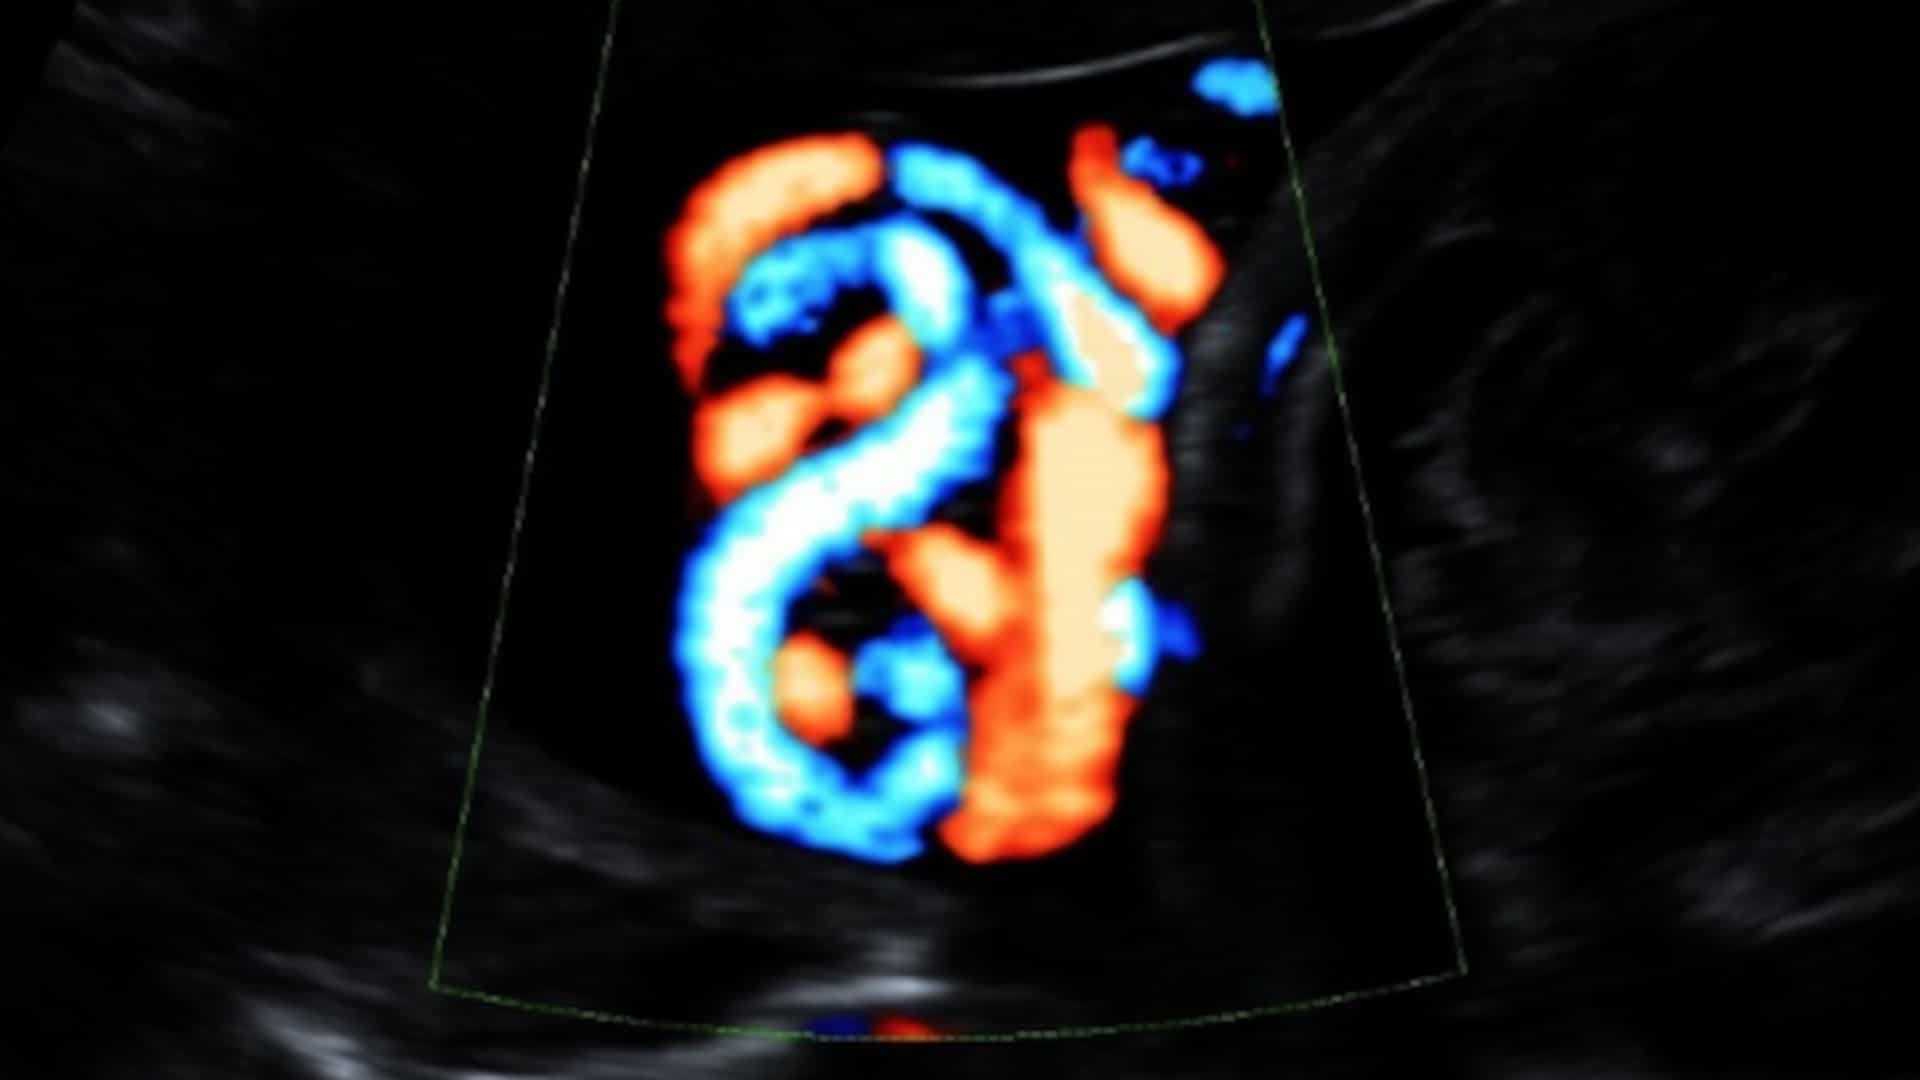 A true umbilical cord knot, viewed by an imaging technology called 3D HD Flow.